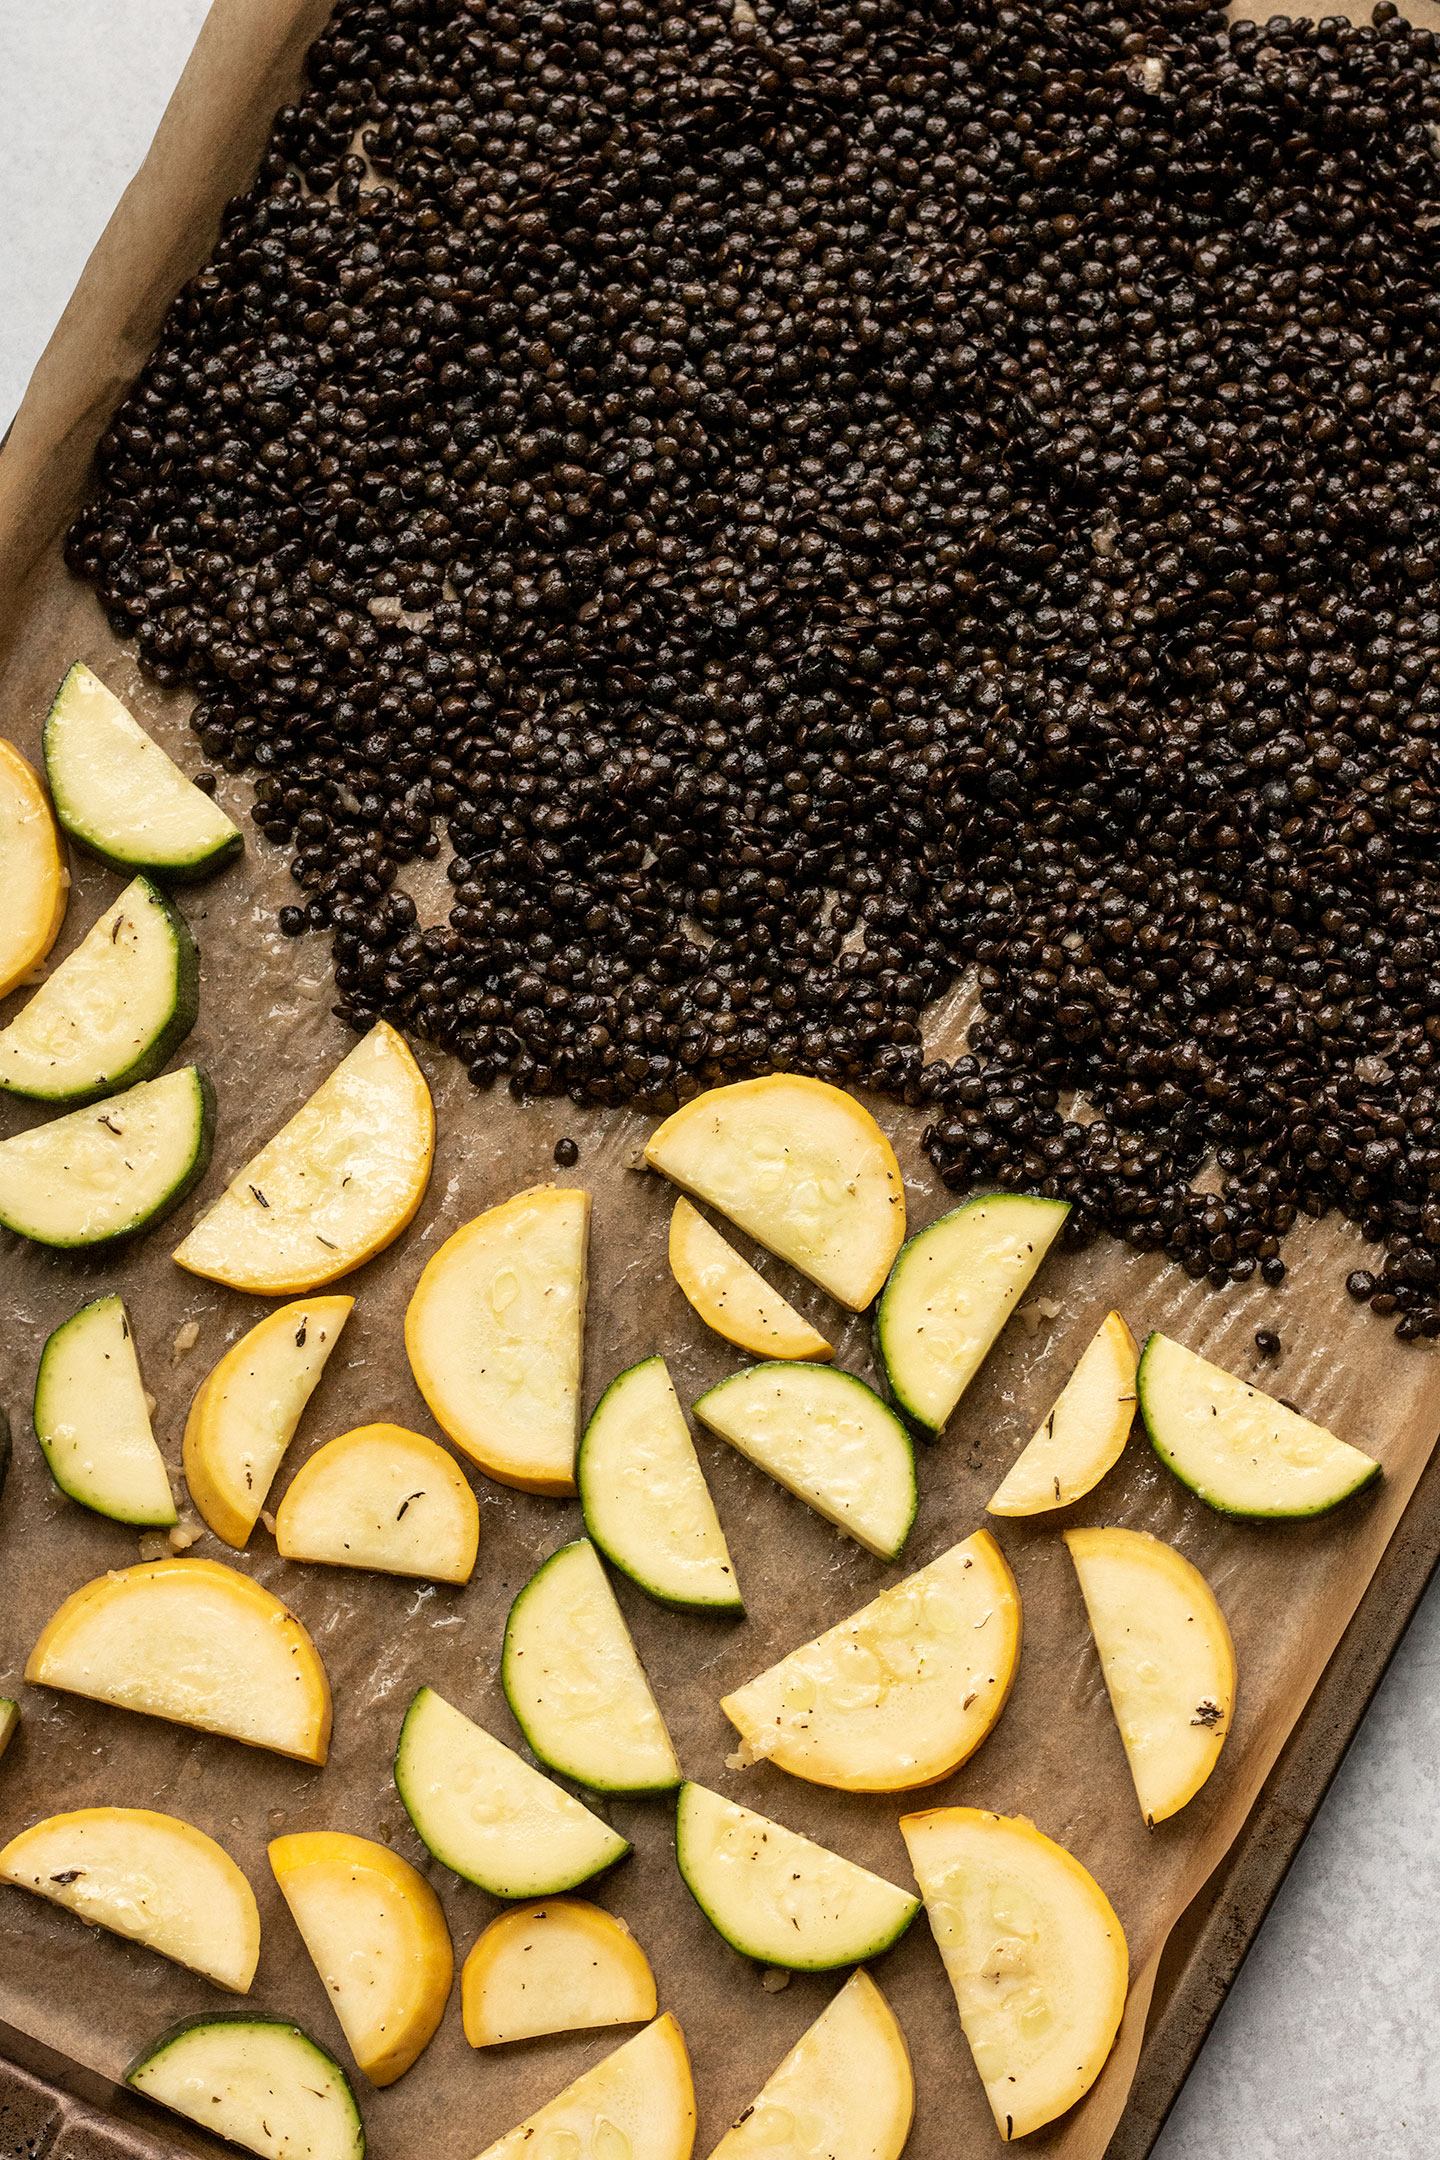 Coated lentils and squash spread out on a parchment paper lined baking tray.